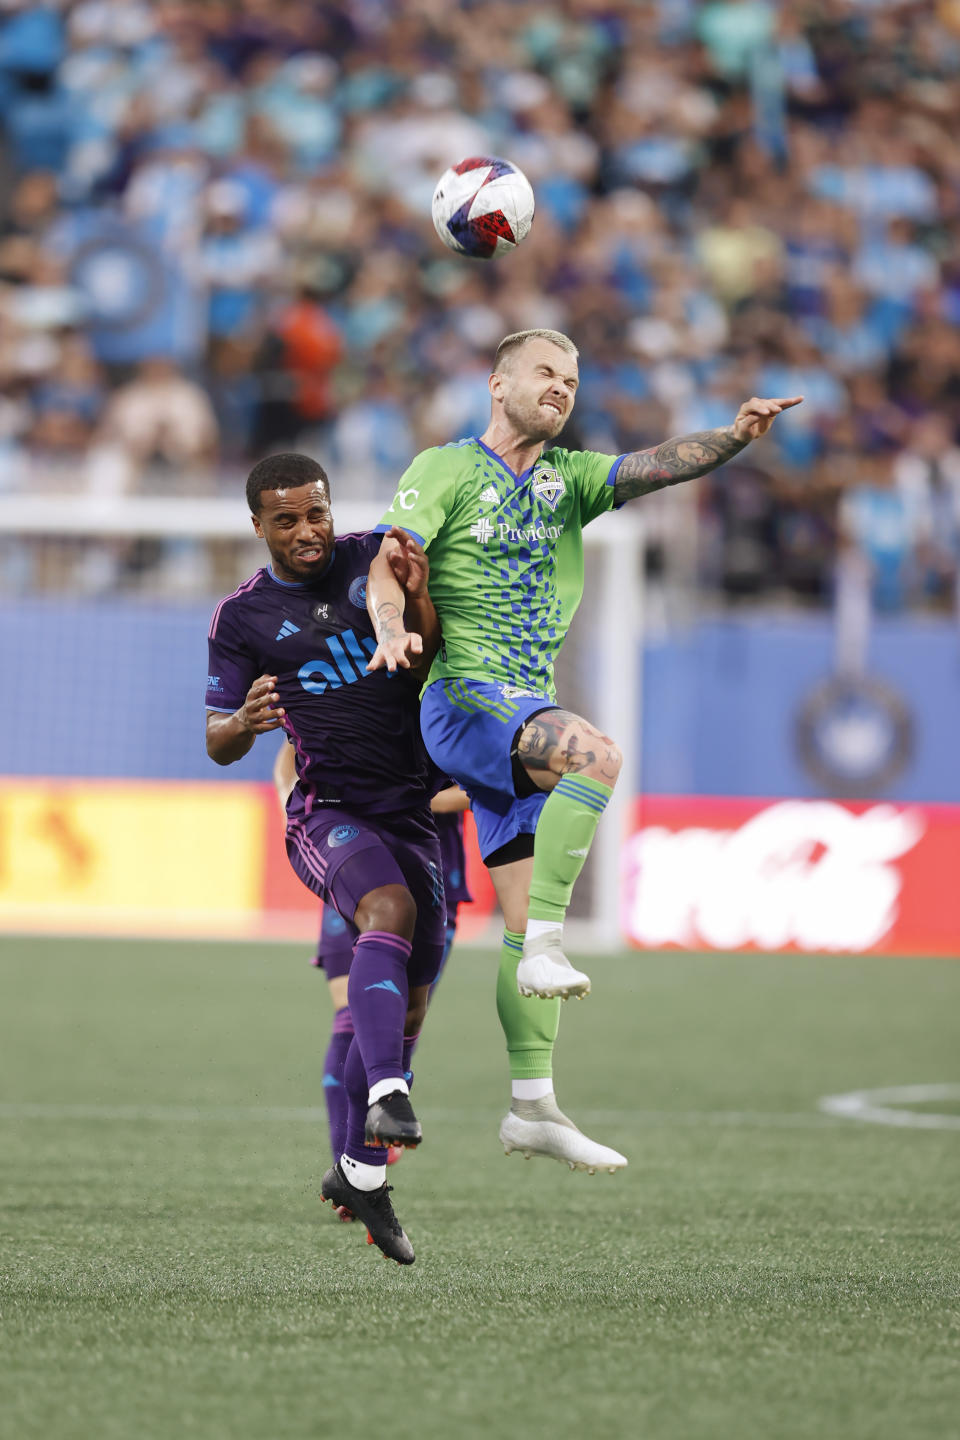 Seattle Sounders midfielder Albert Rusnák (11) battles for a jump ball with Charlotte FC defender Nathan Byrne (14) during an MLS soccer match, Saturday, June 10, 2023, in Charlotte, N.C. (AP Photo/Brian Westerholt)